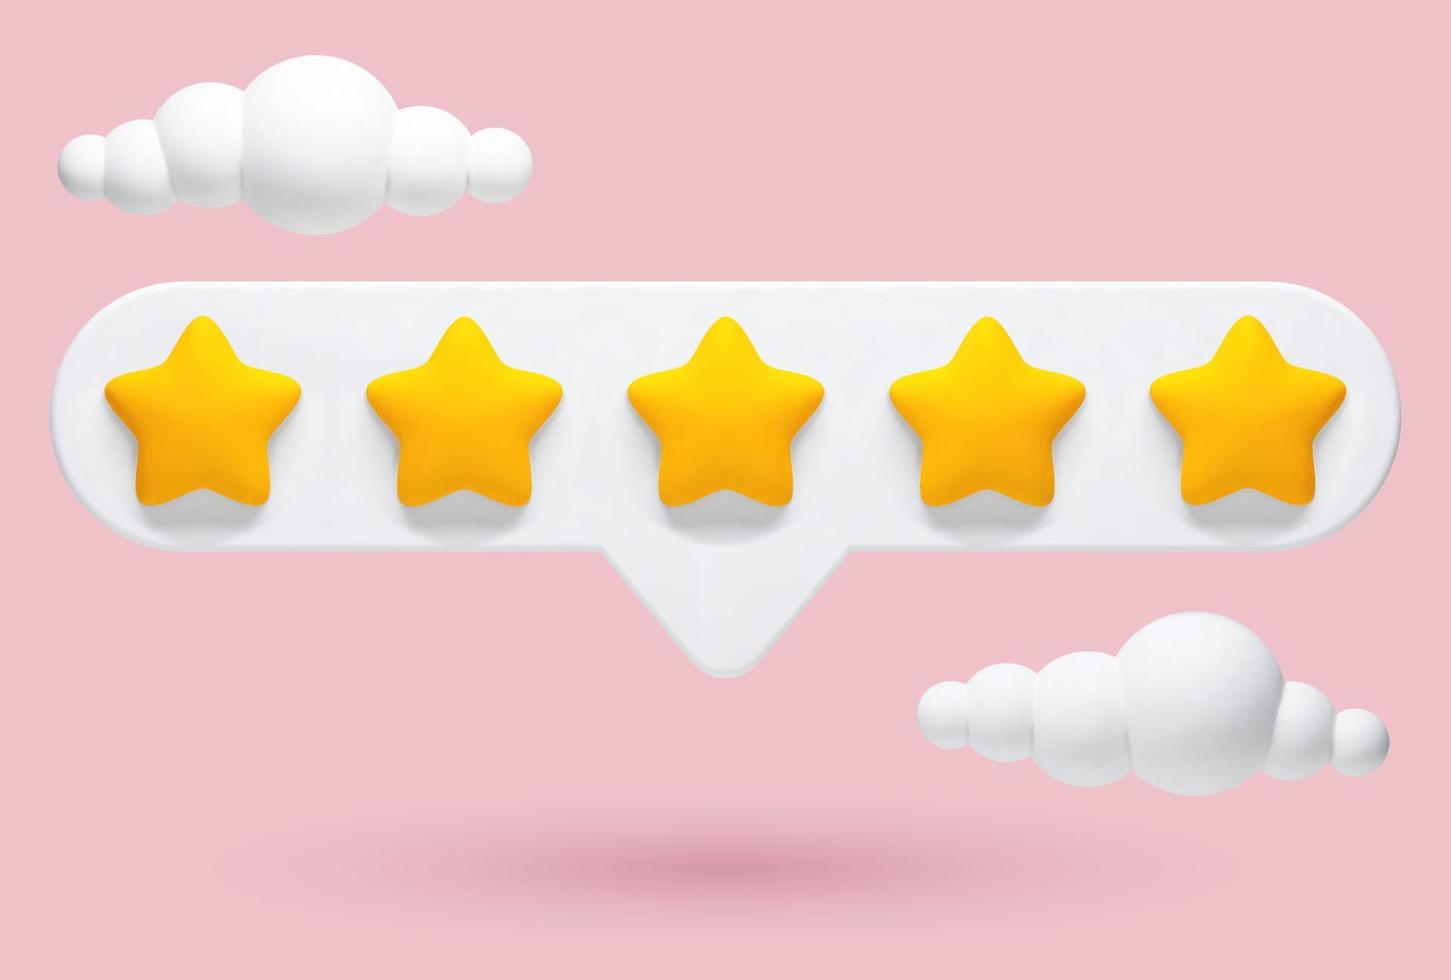 Vector 3d realistic illustration of 5-star feedback, evaluation of a product or service on a pink background with clouds